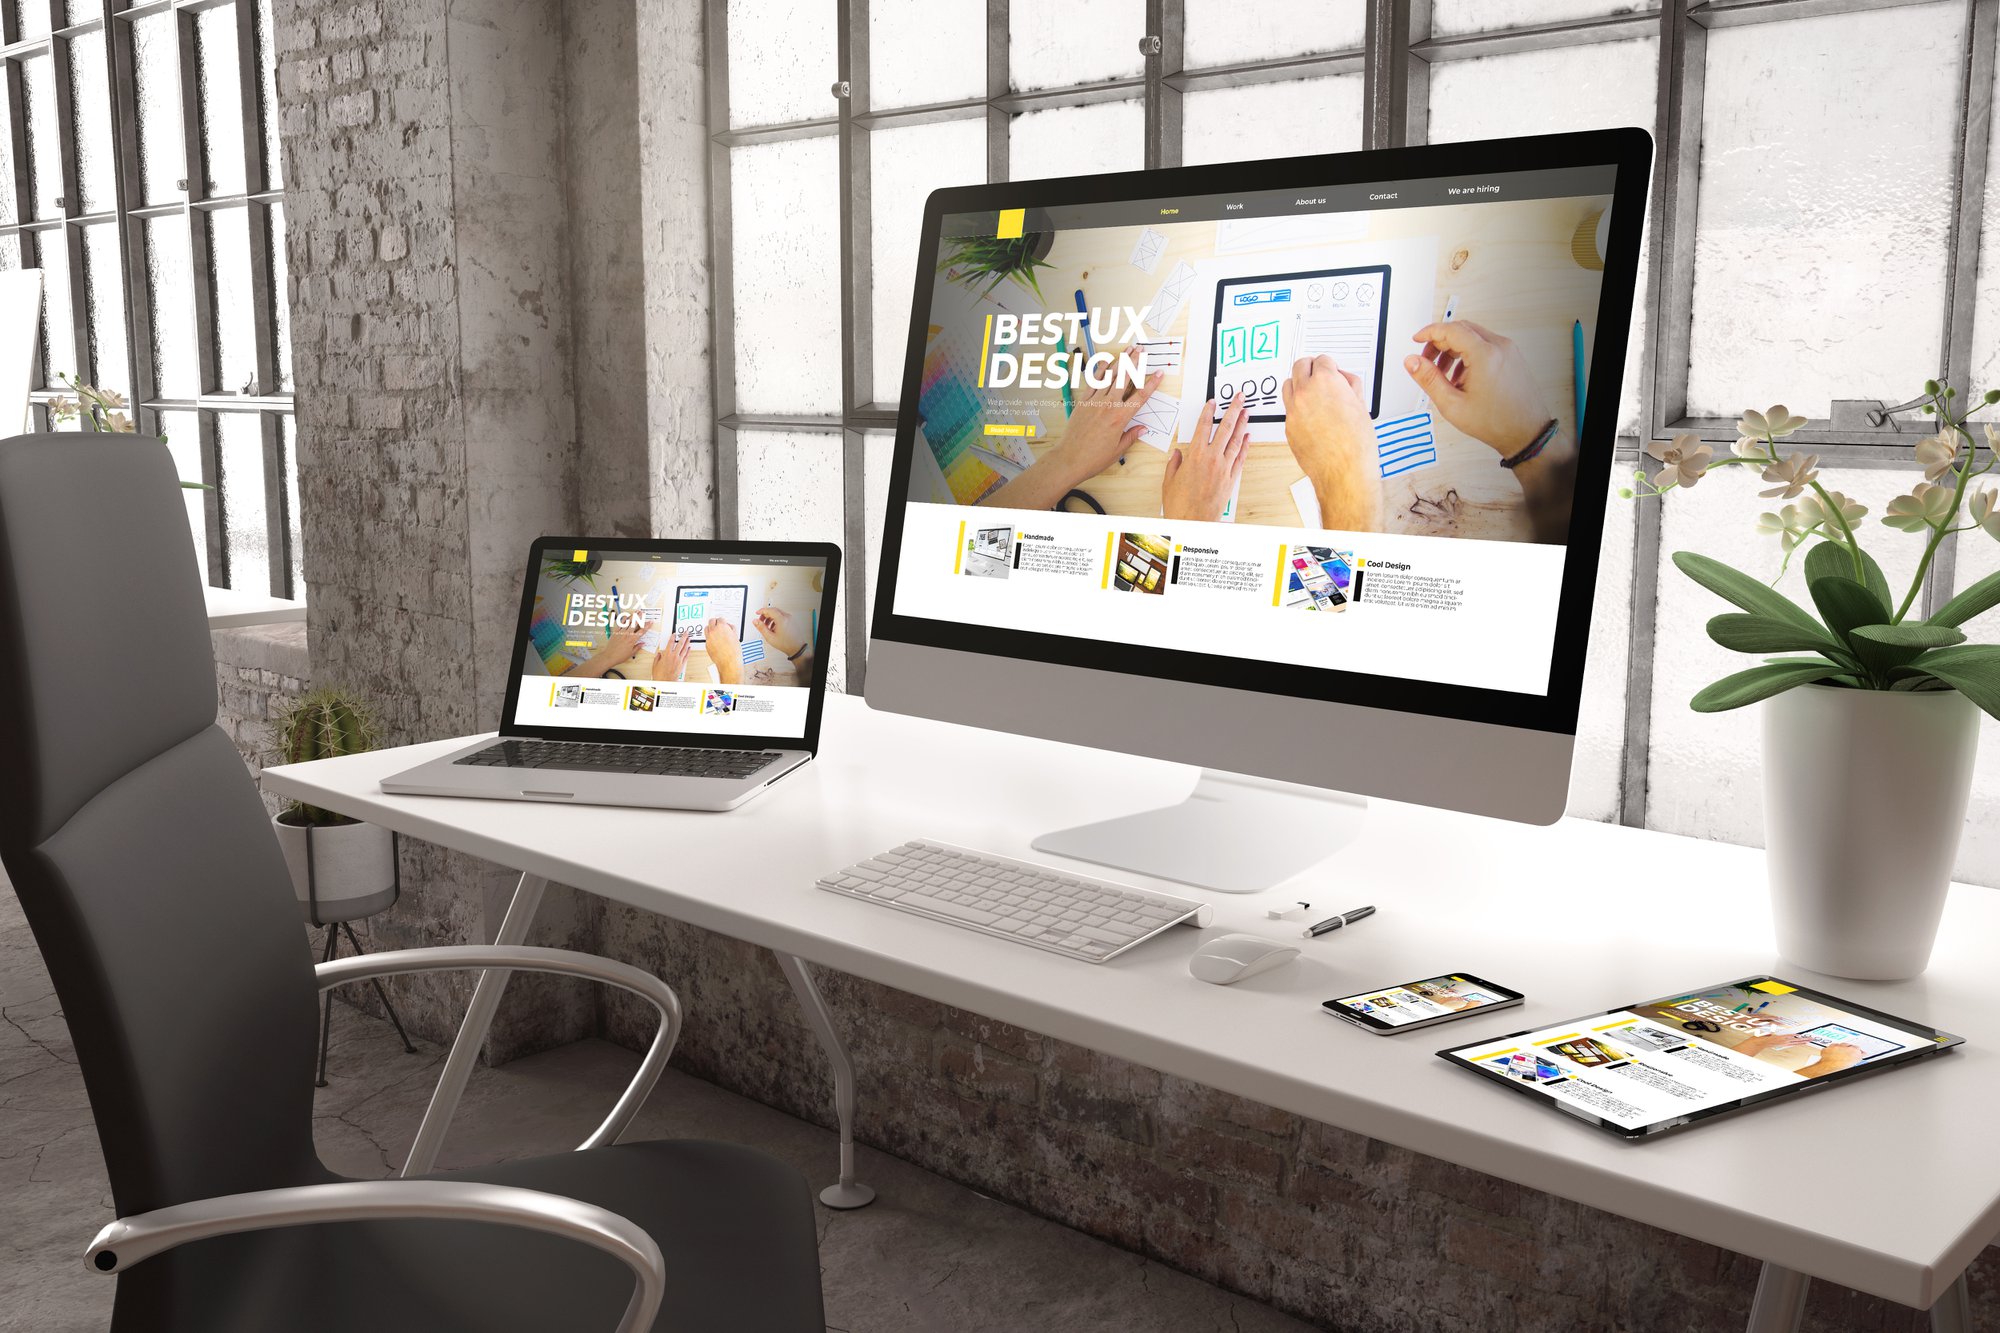 Design Decisions – 3 Website Design Tips to Help Your Business Through COVID